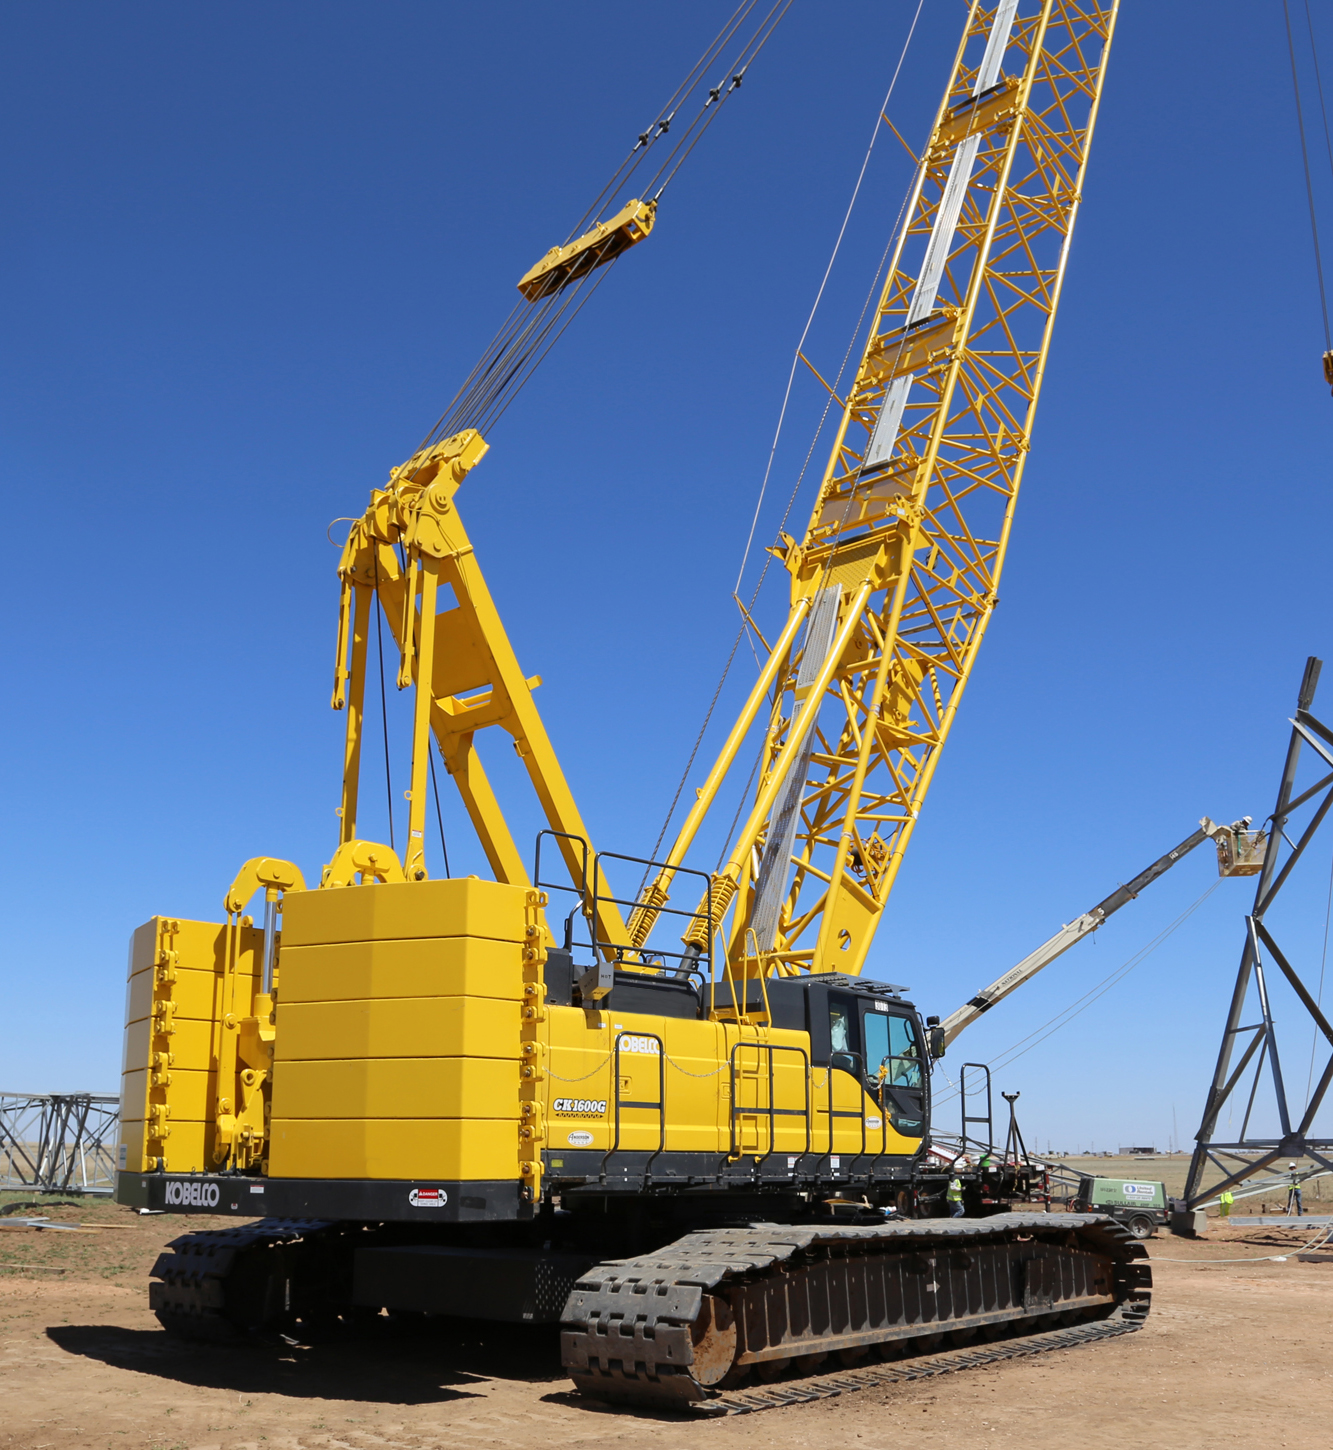 Kobelco CK Series Crawler Cranes Now Available from ALL Family of Companies Crane Network News